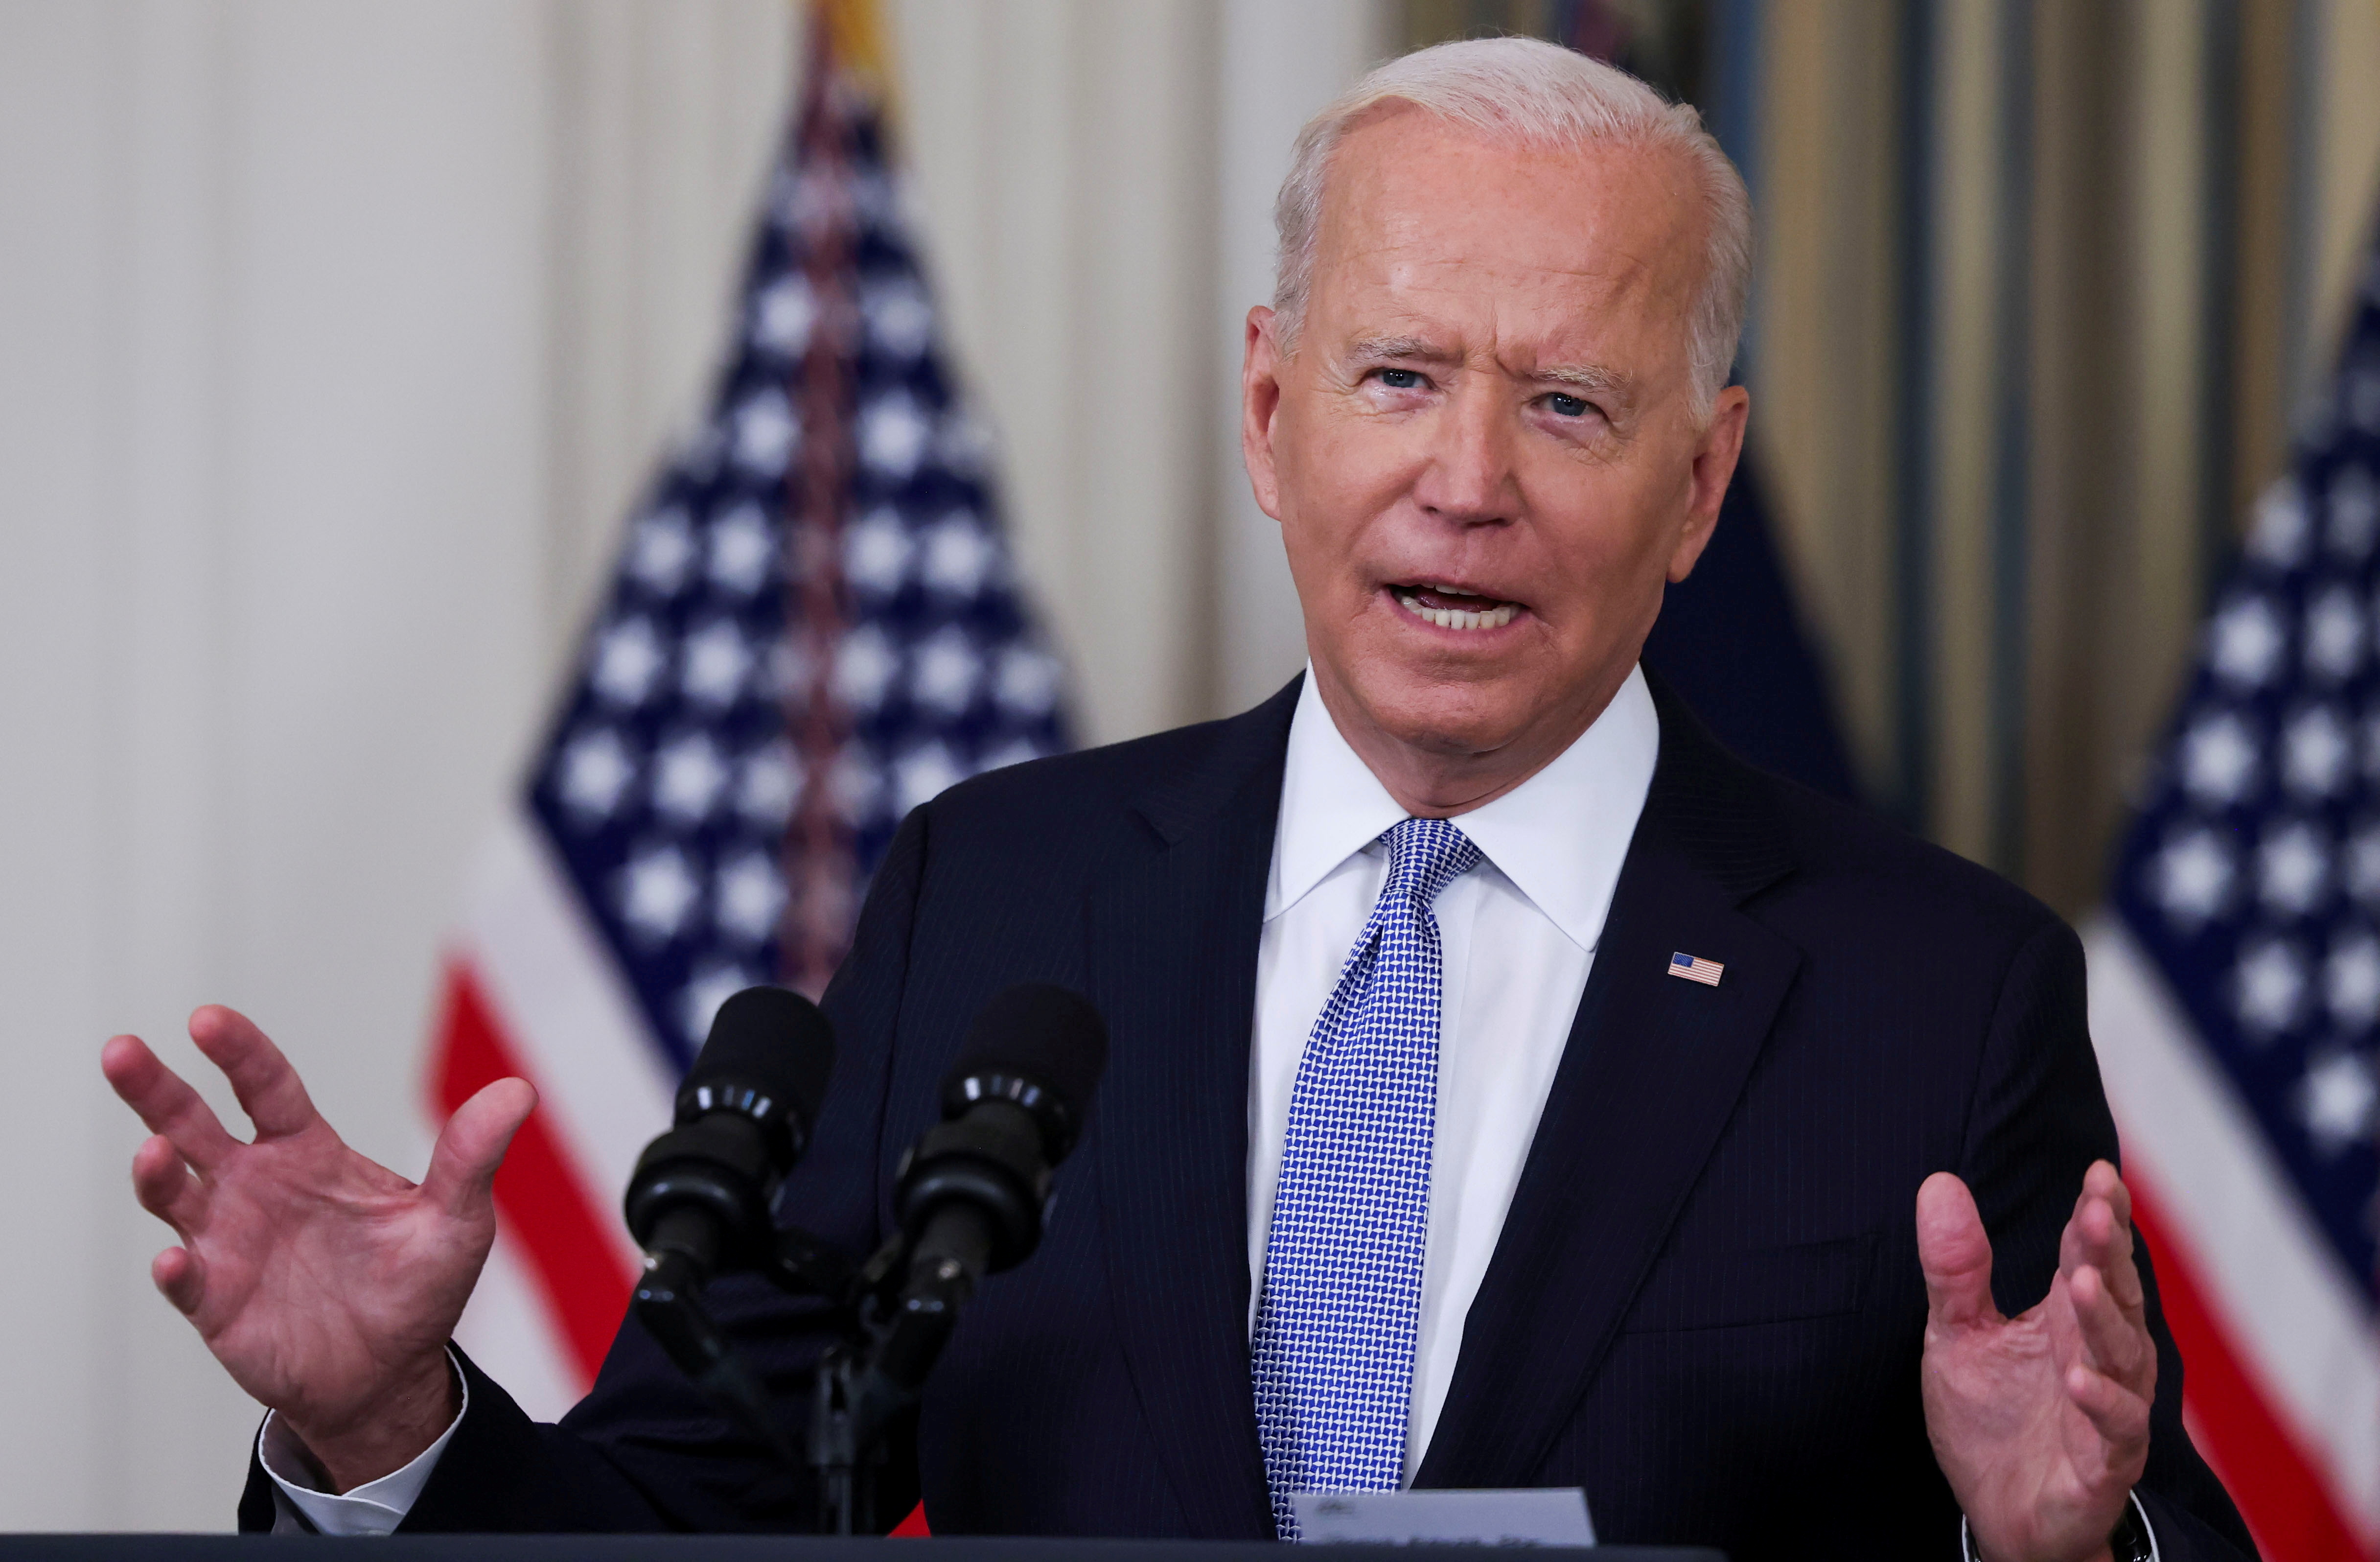 U.S. President Joe Biden speaks about COVID-19 vaccines at the White House in Washington